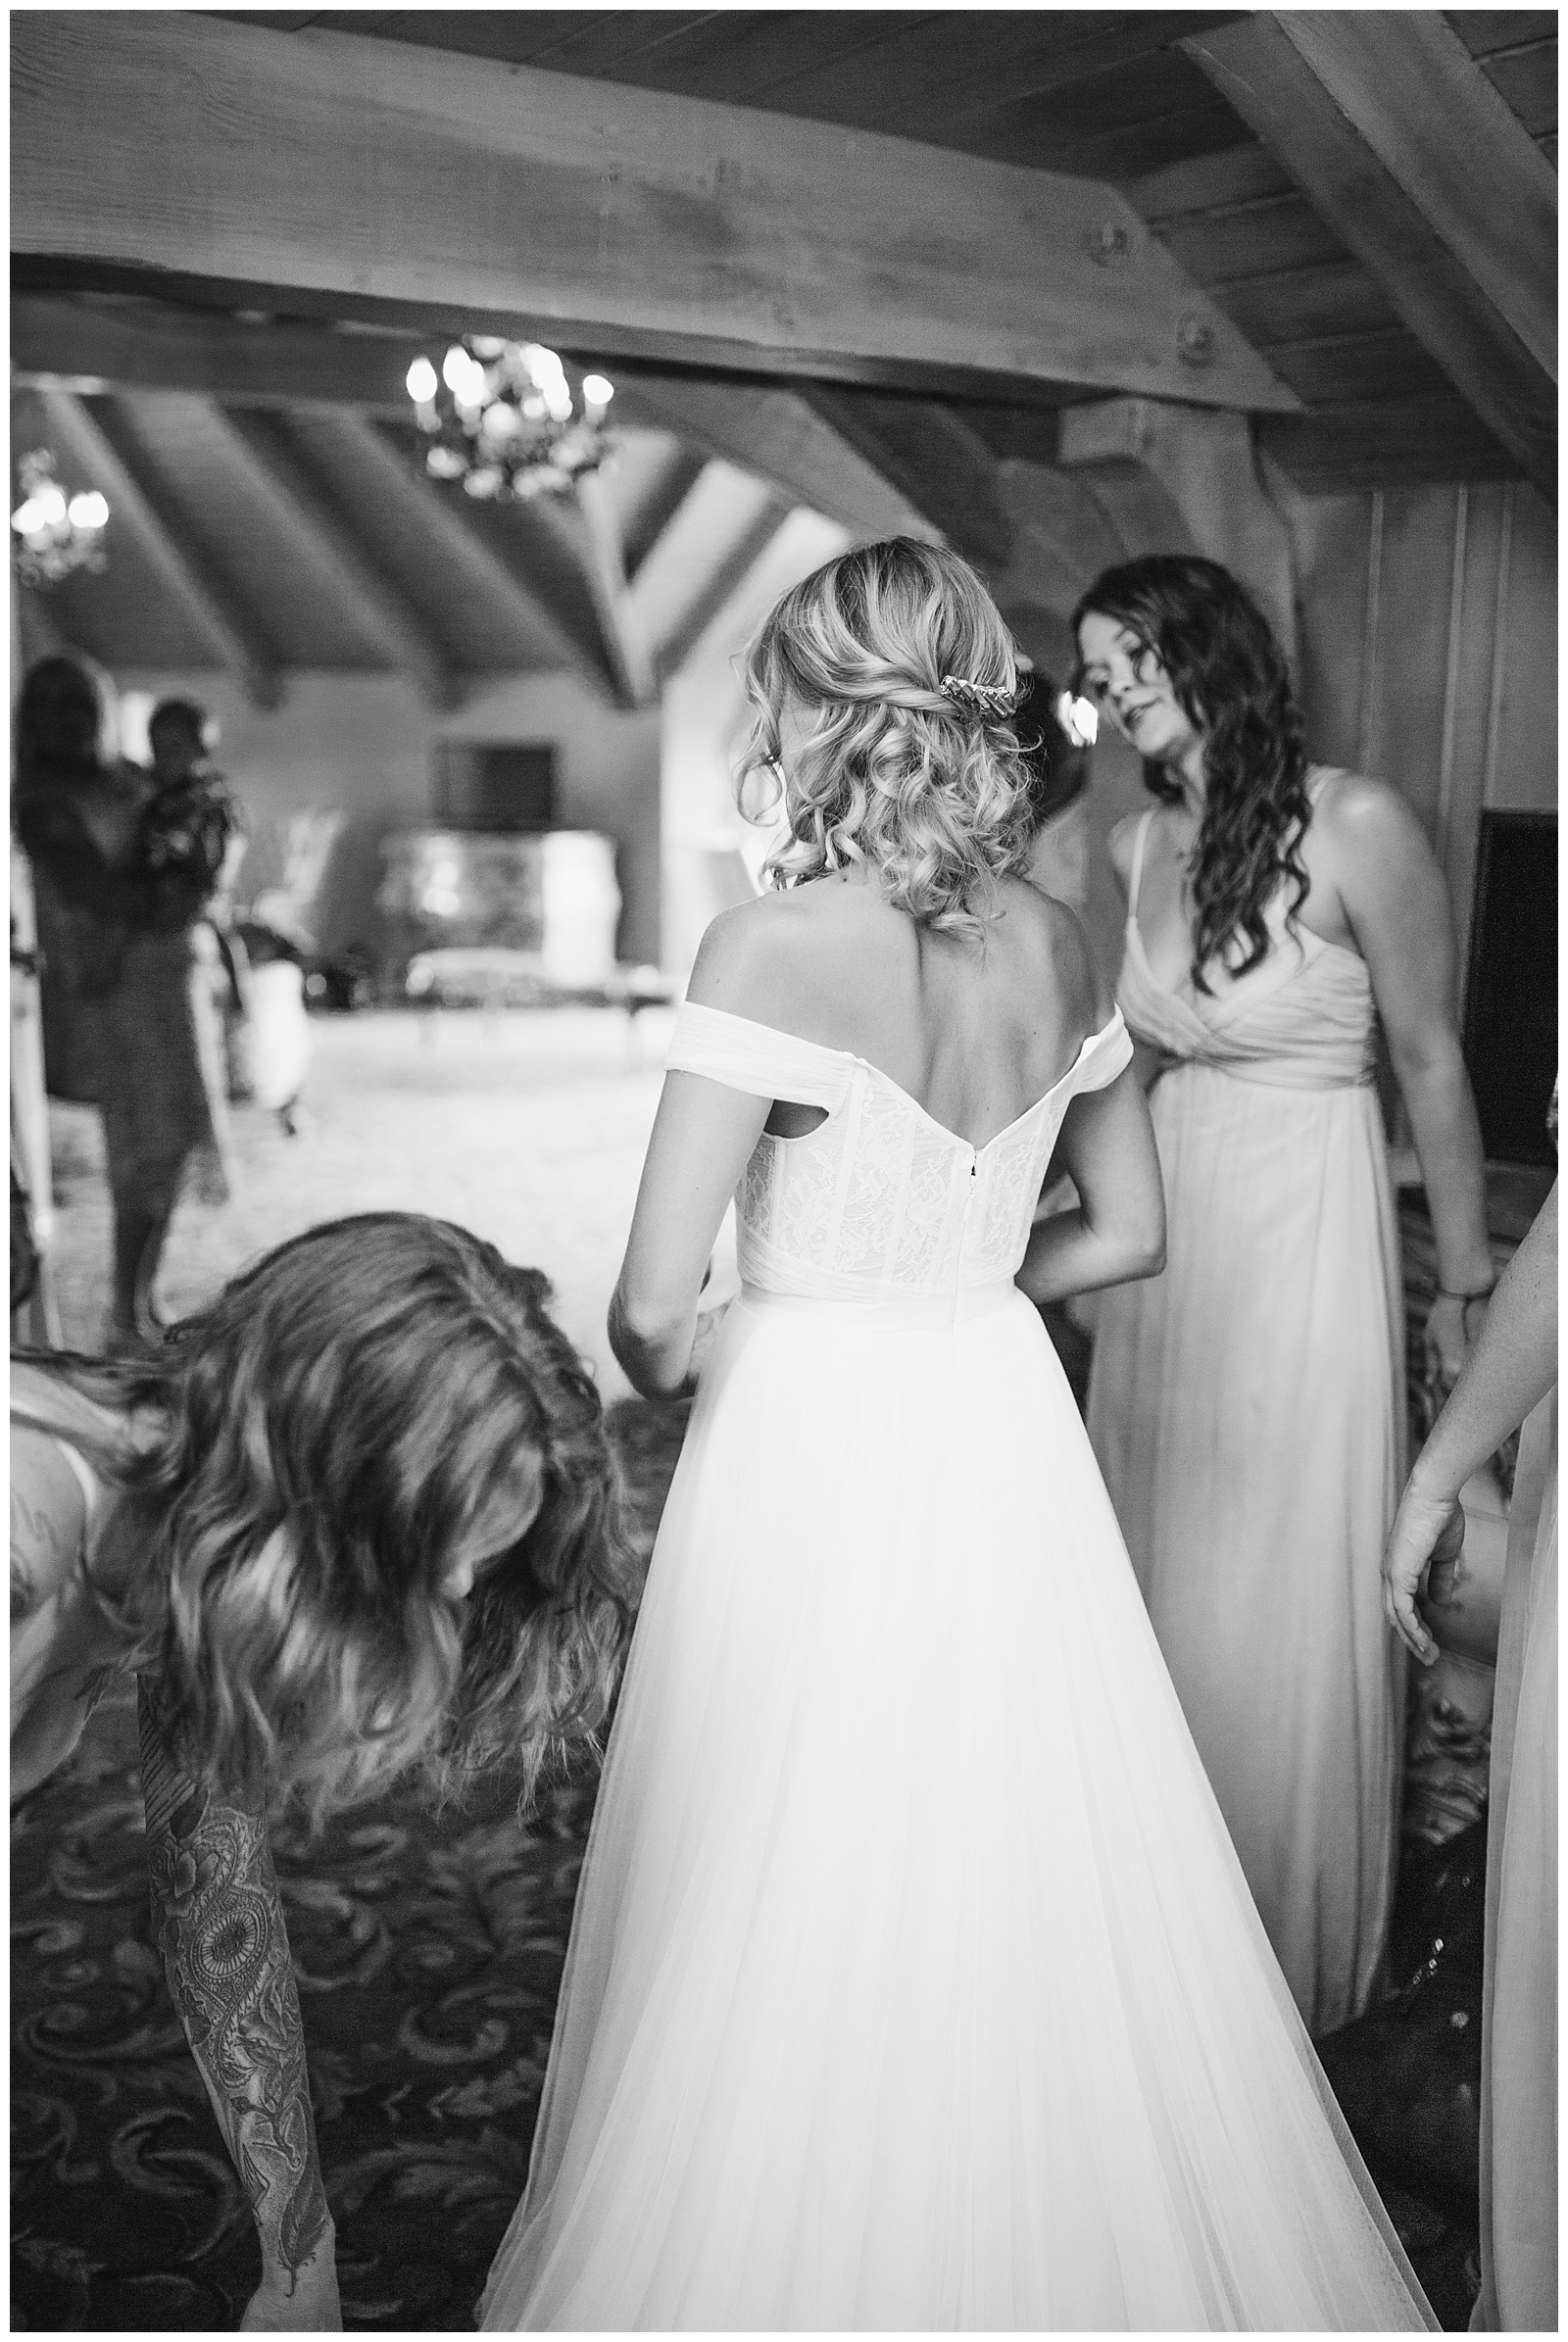 Bridesmaids helping the bride into her wedding gown